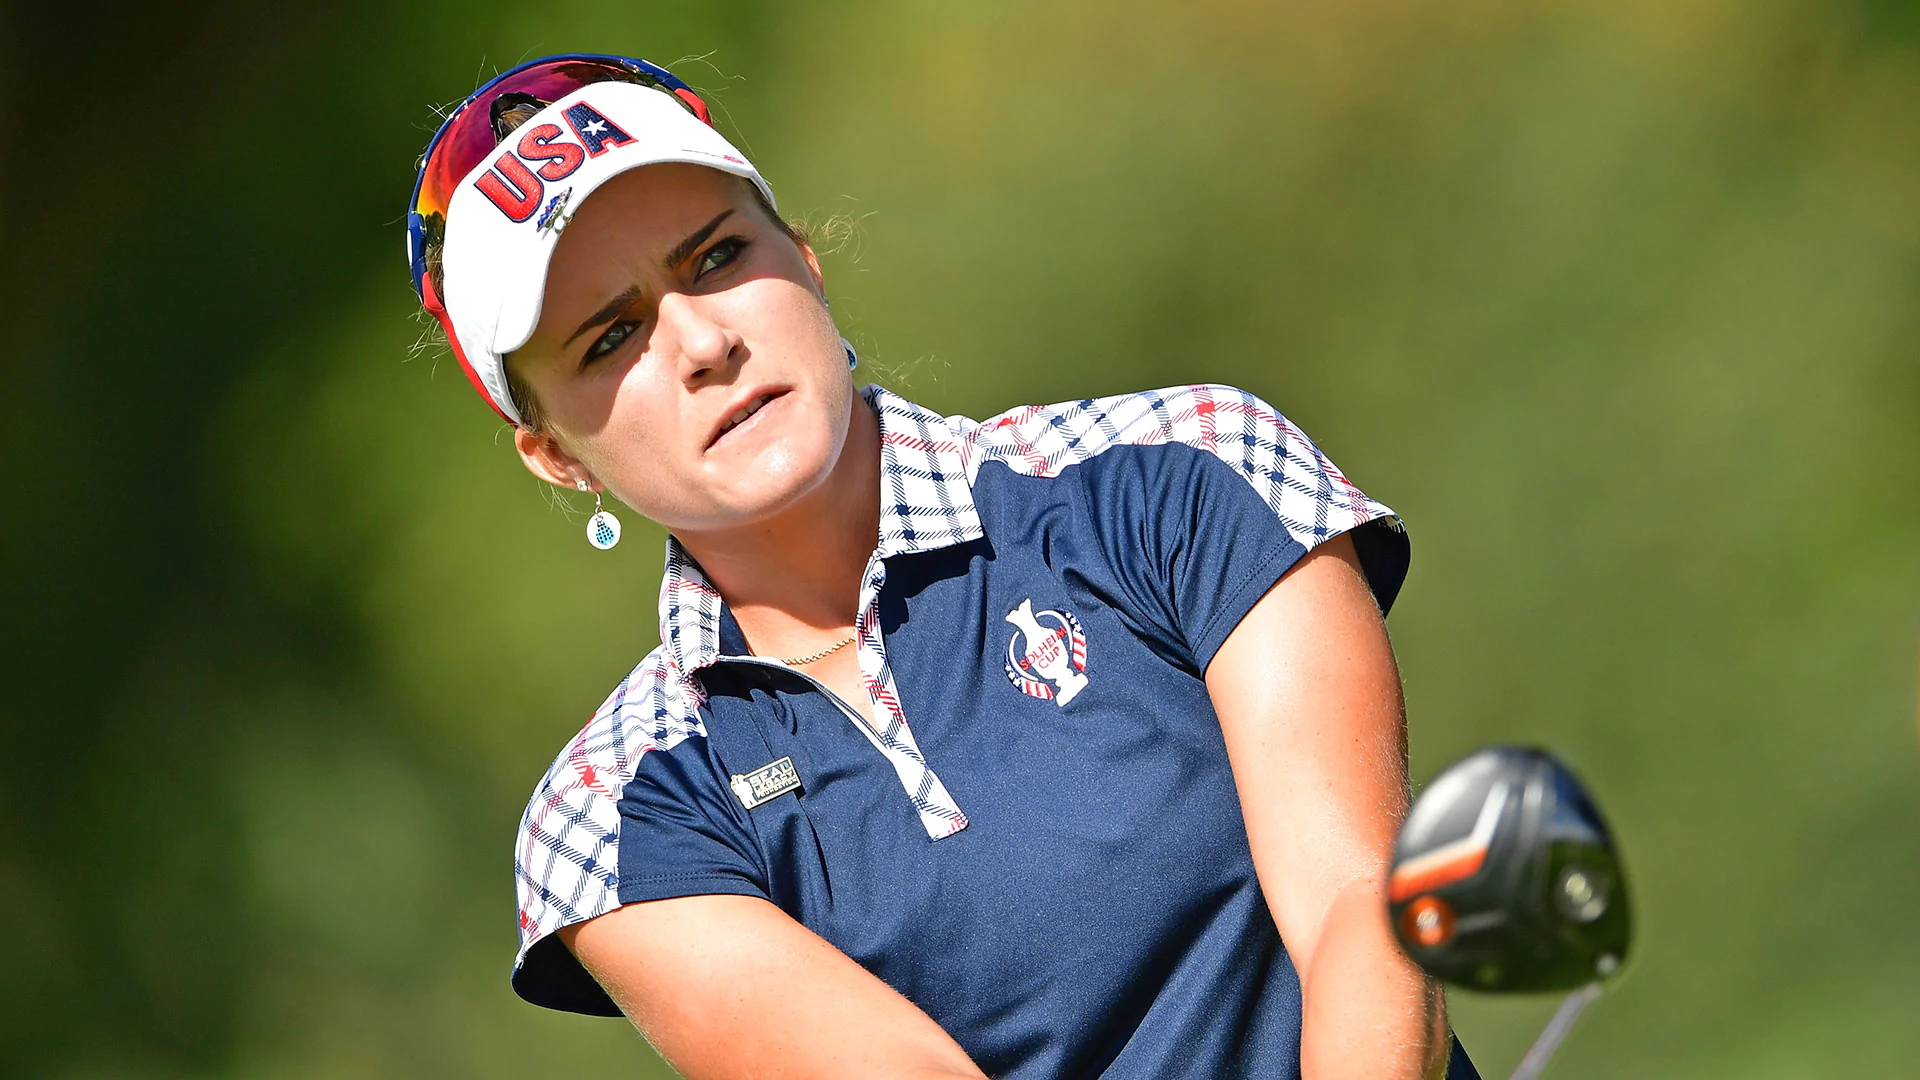 Lexi: From awful start to halve with Nordqvist